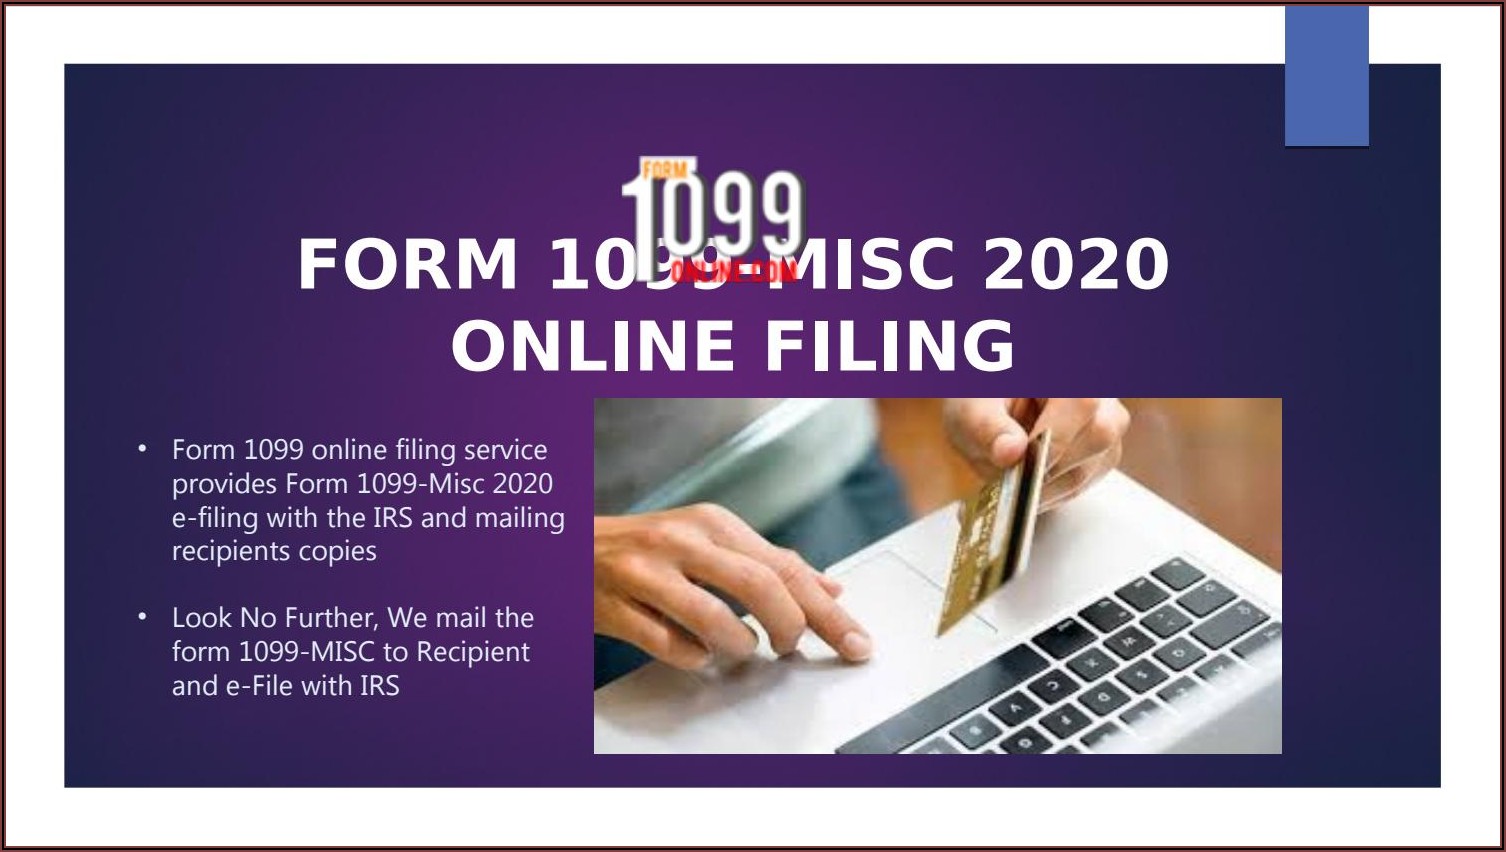 Where Can I Get Irs Form 1099 Misc